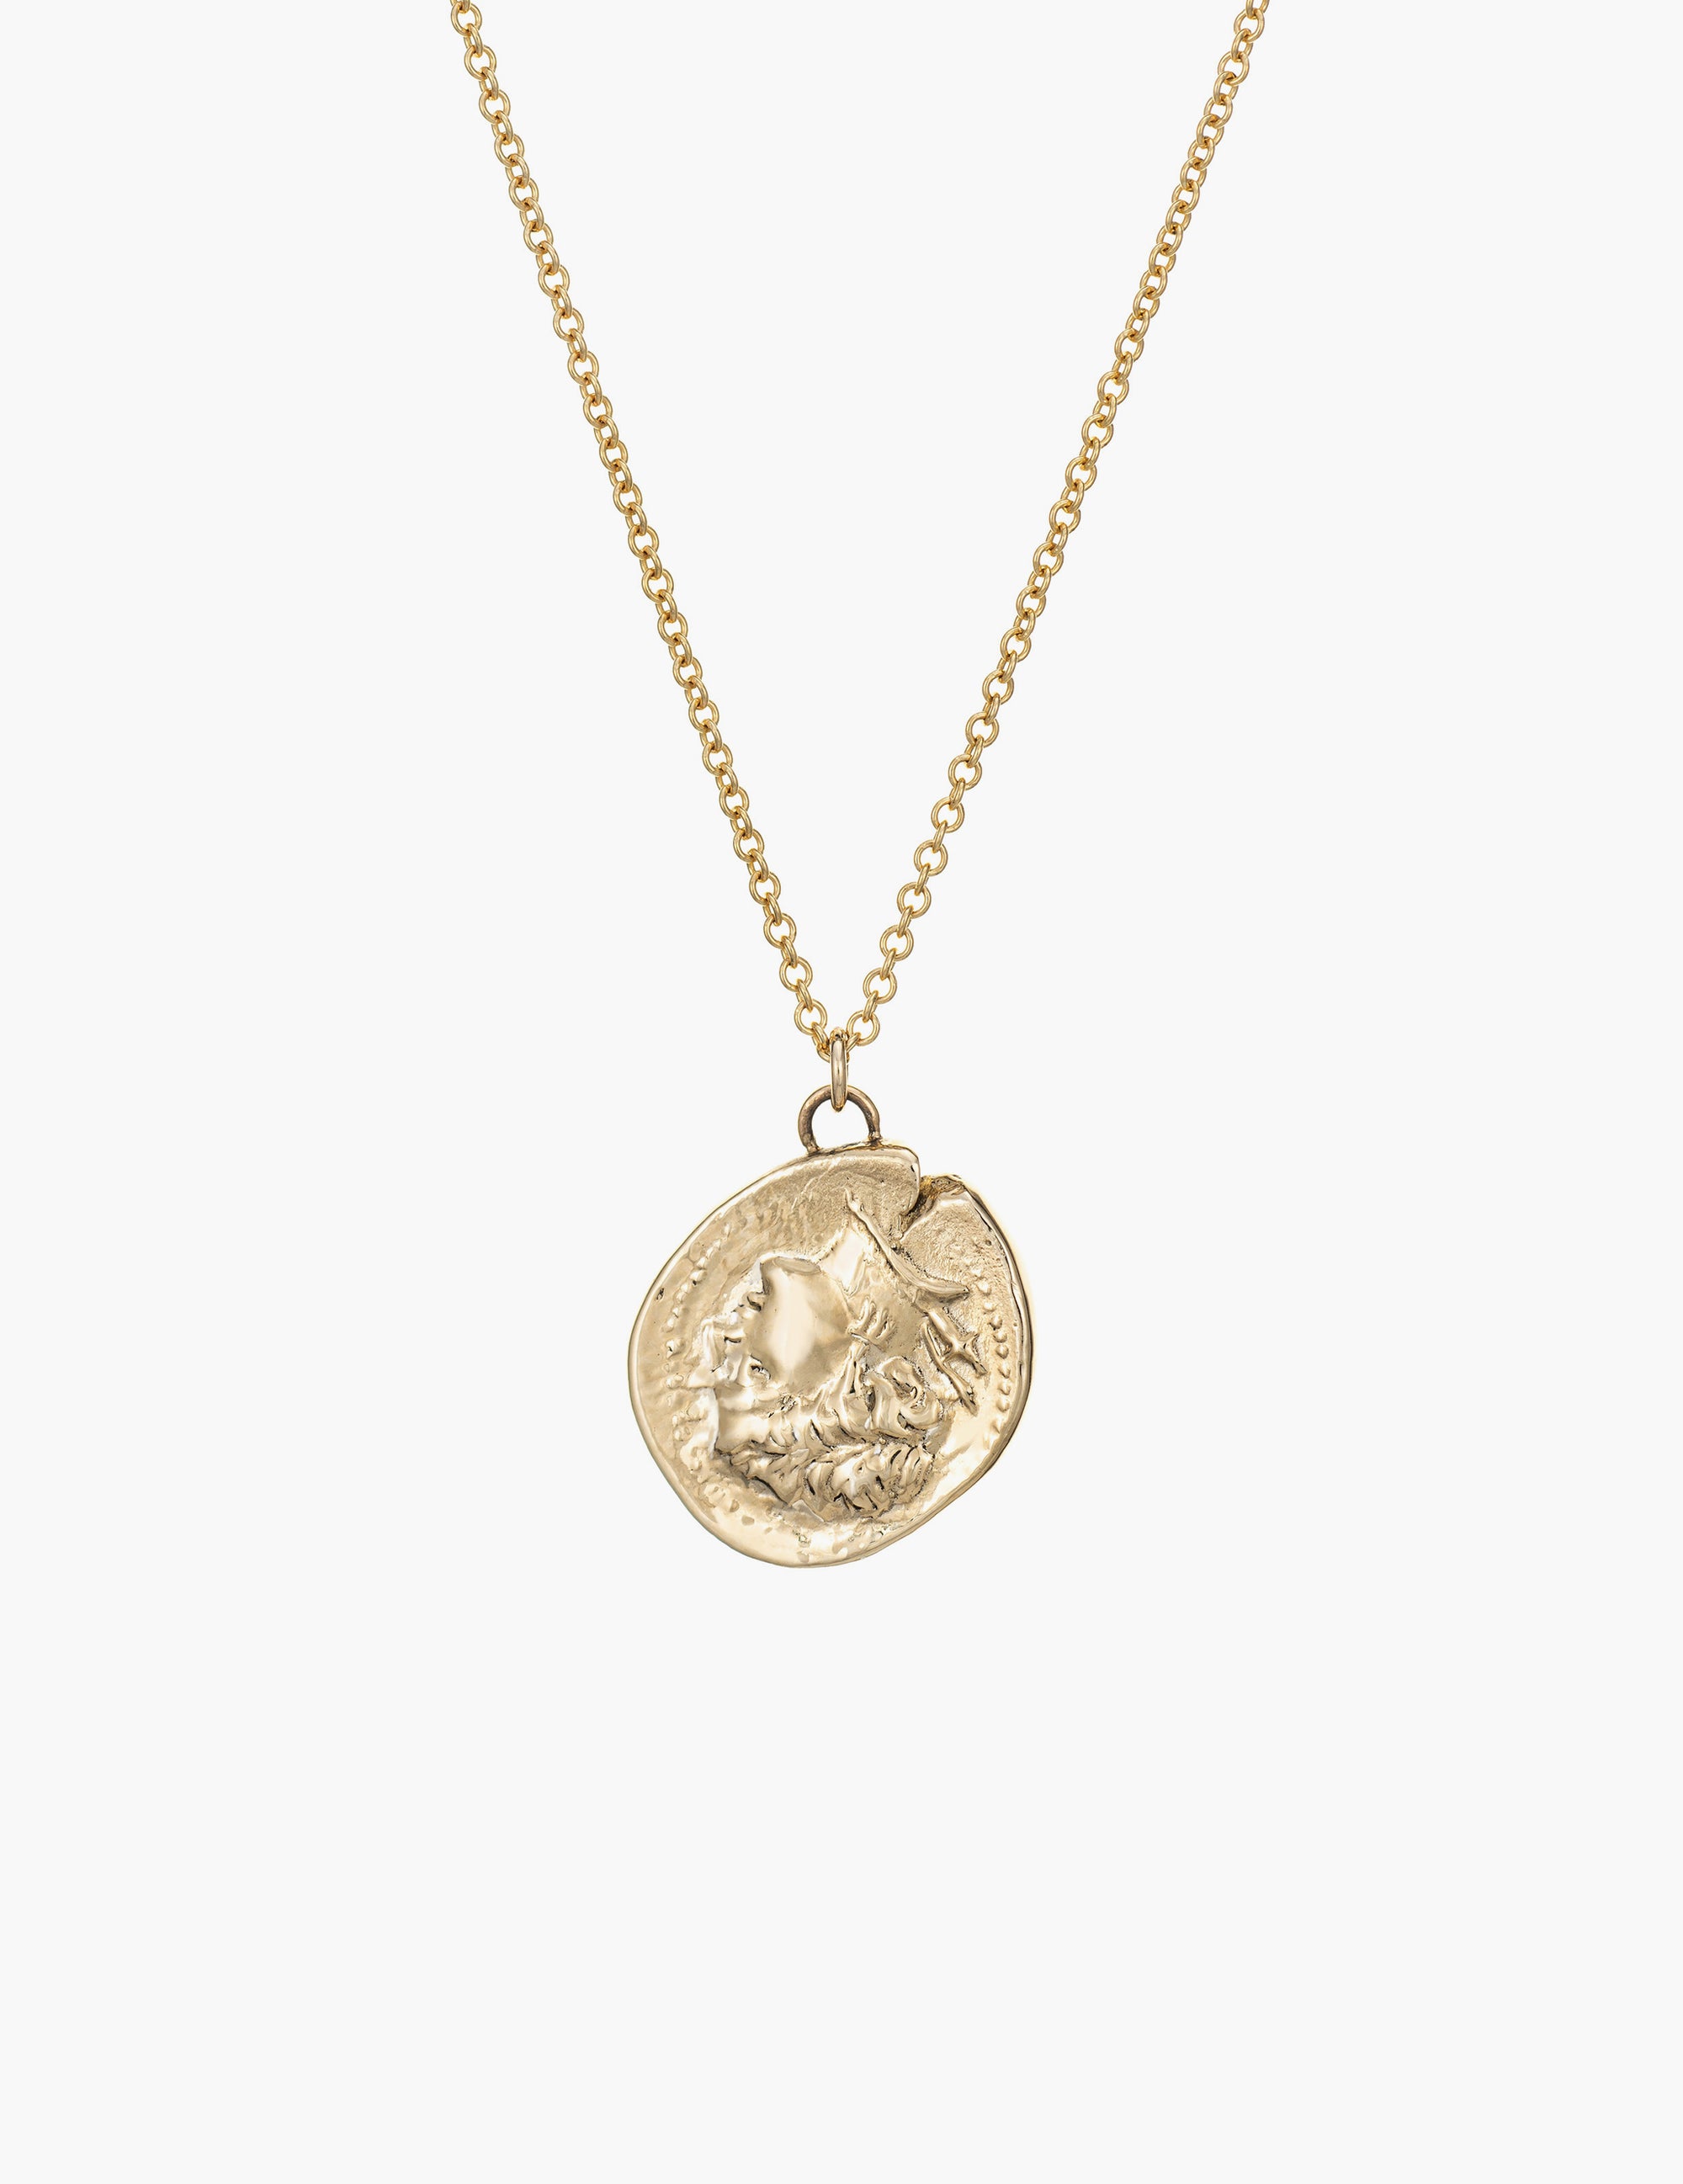 Vintage Gold Plated Chain with Gold Horse Coin Pendant 18 –  erinknightdesigns